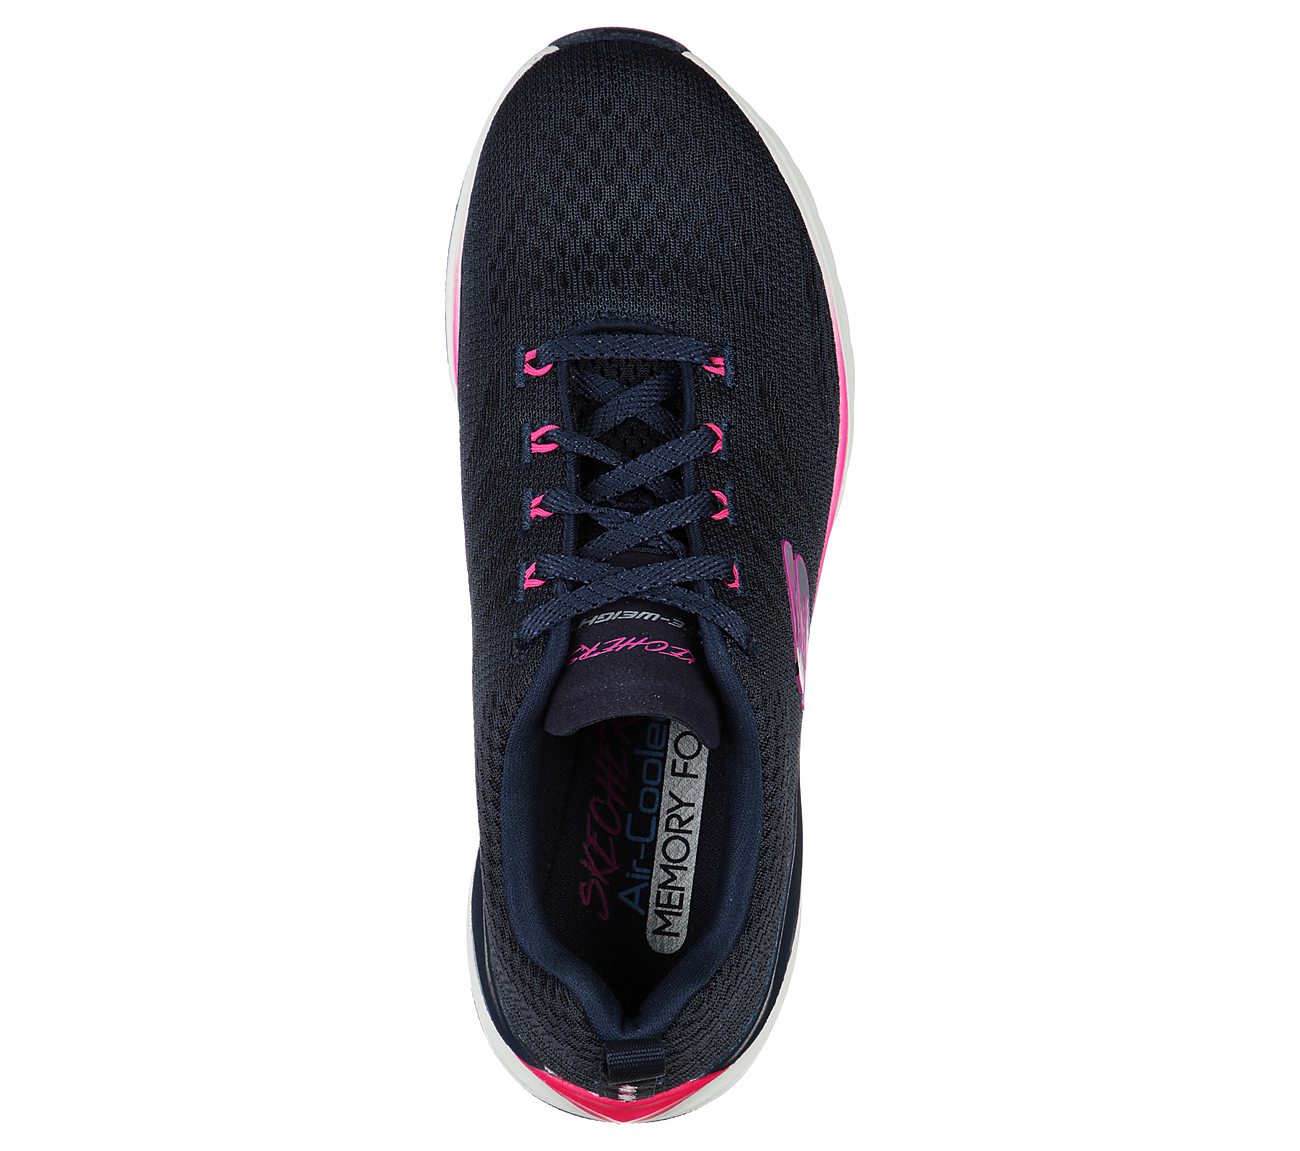 ULTRA GROOVE - PURE VISION, NAVY/HOT PINK Footwear Top View